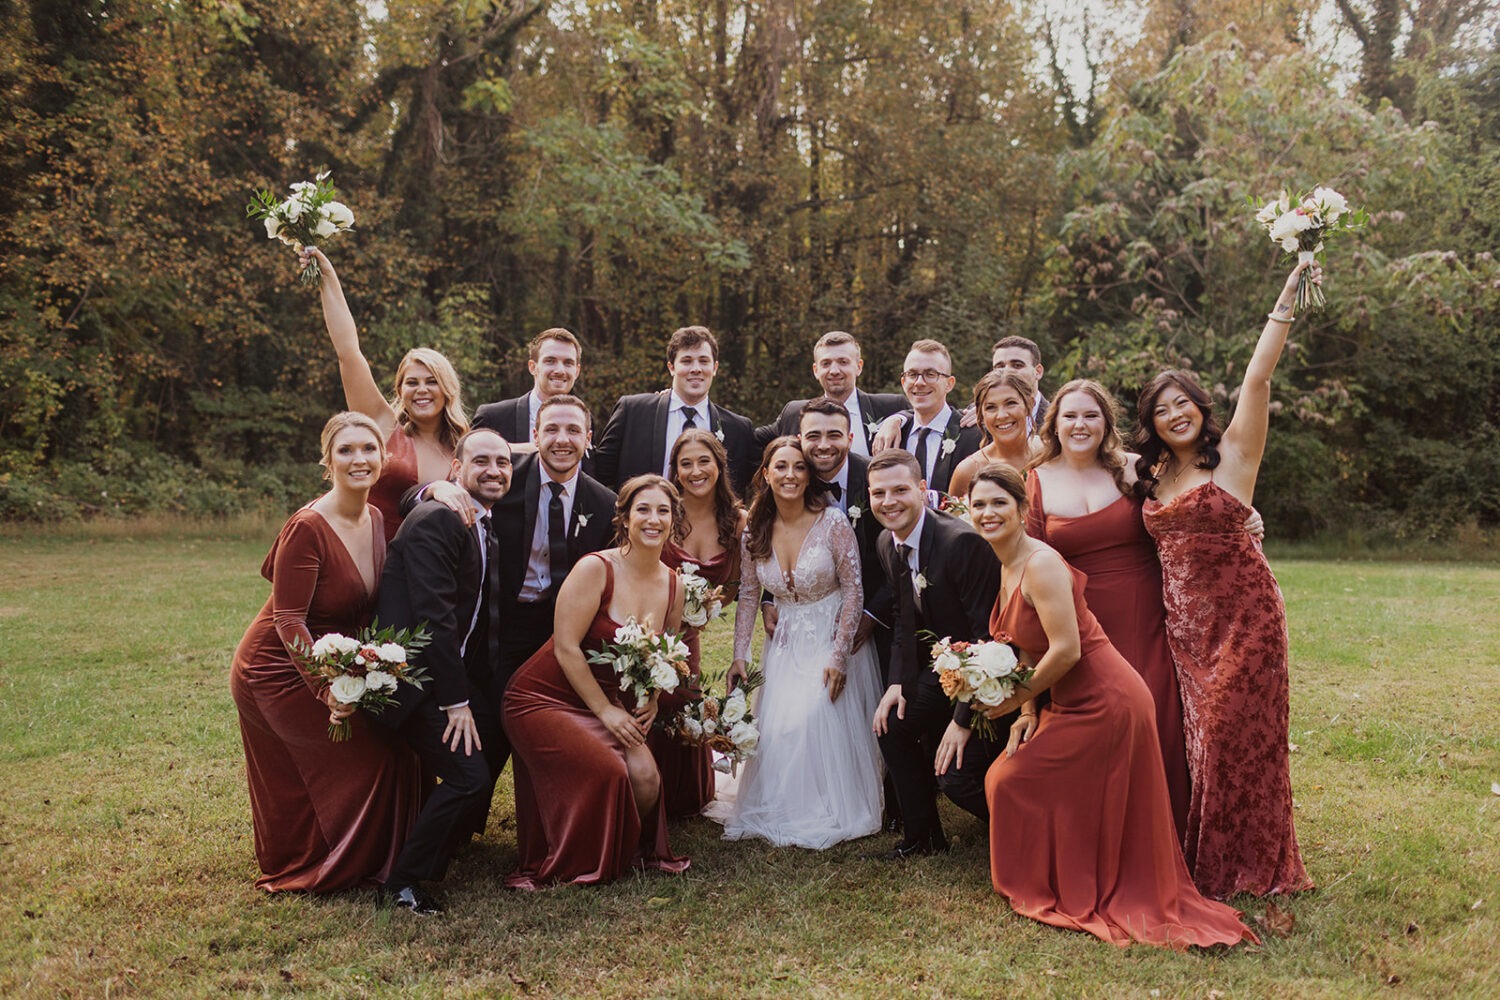 couple poses surrounded by wedding party at outdoor wedding